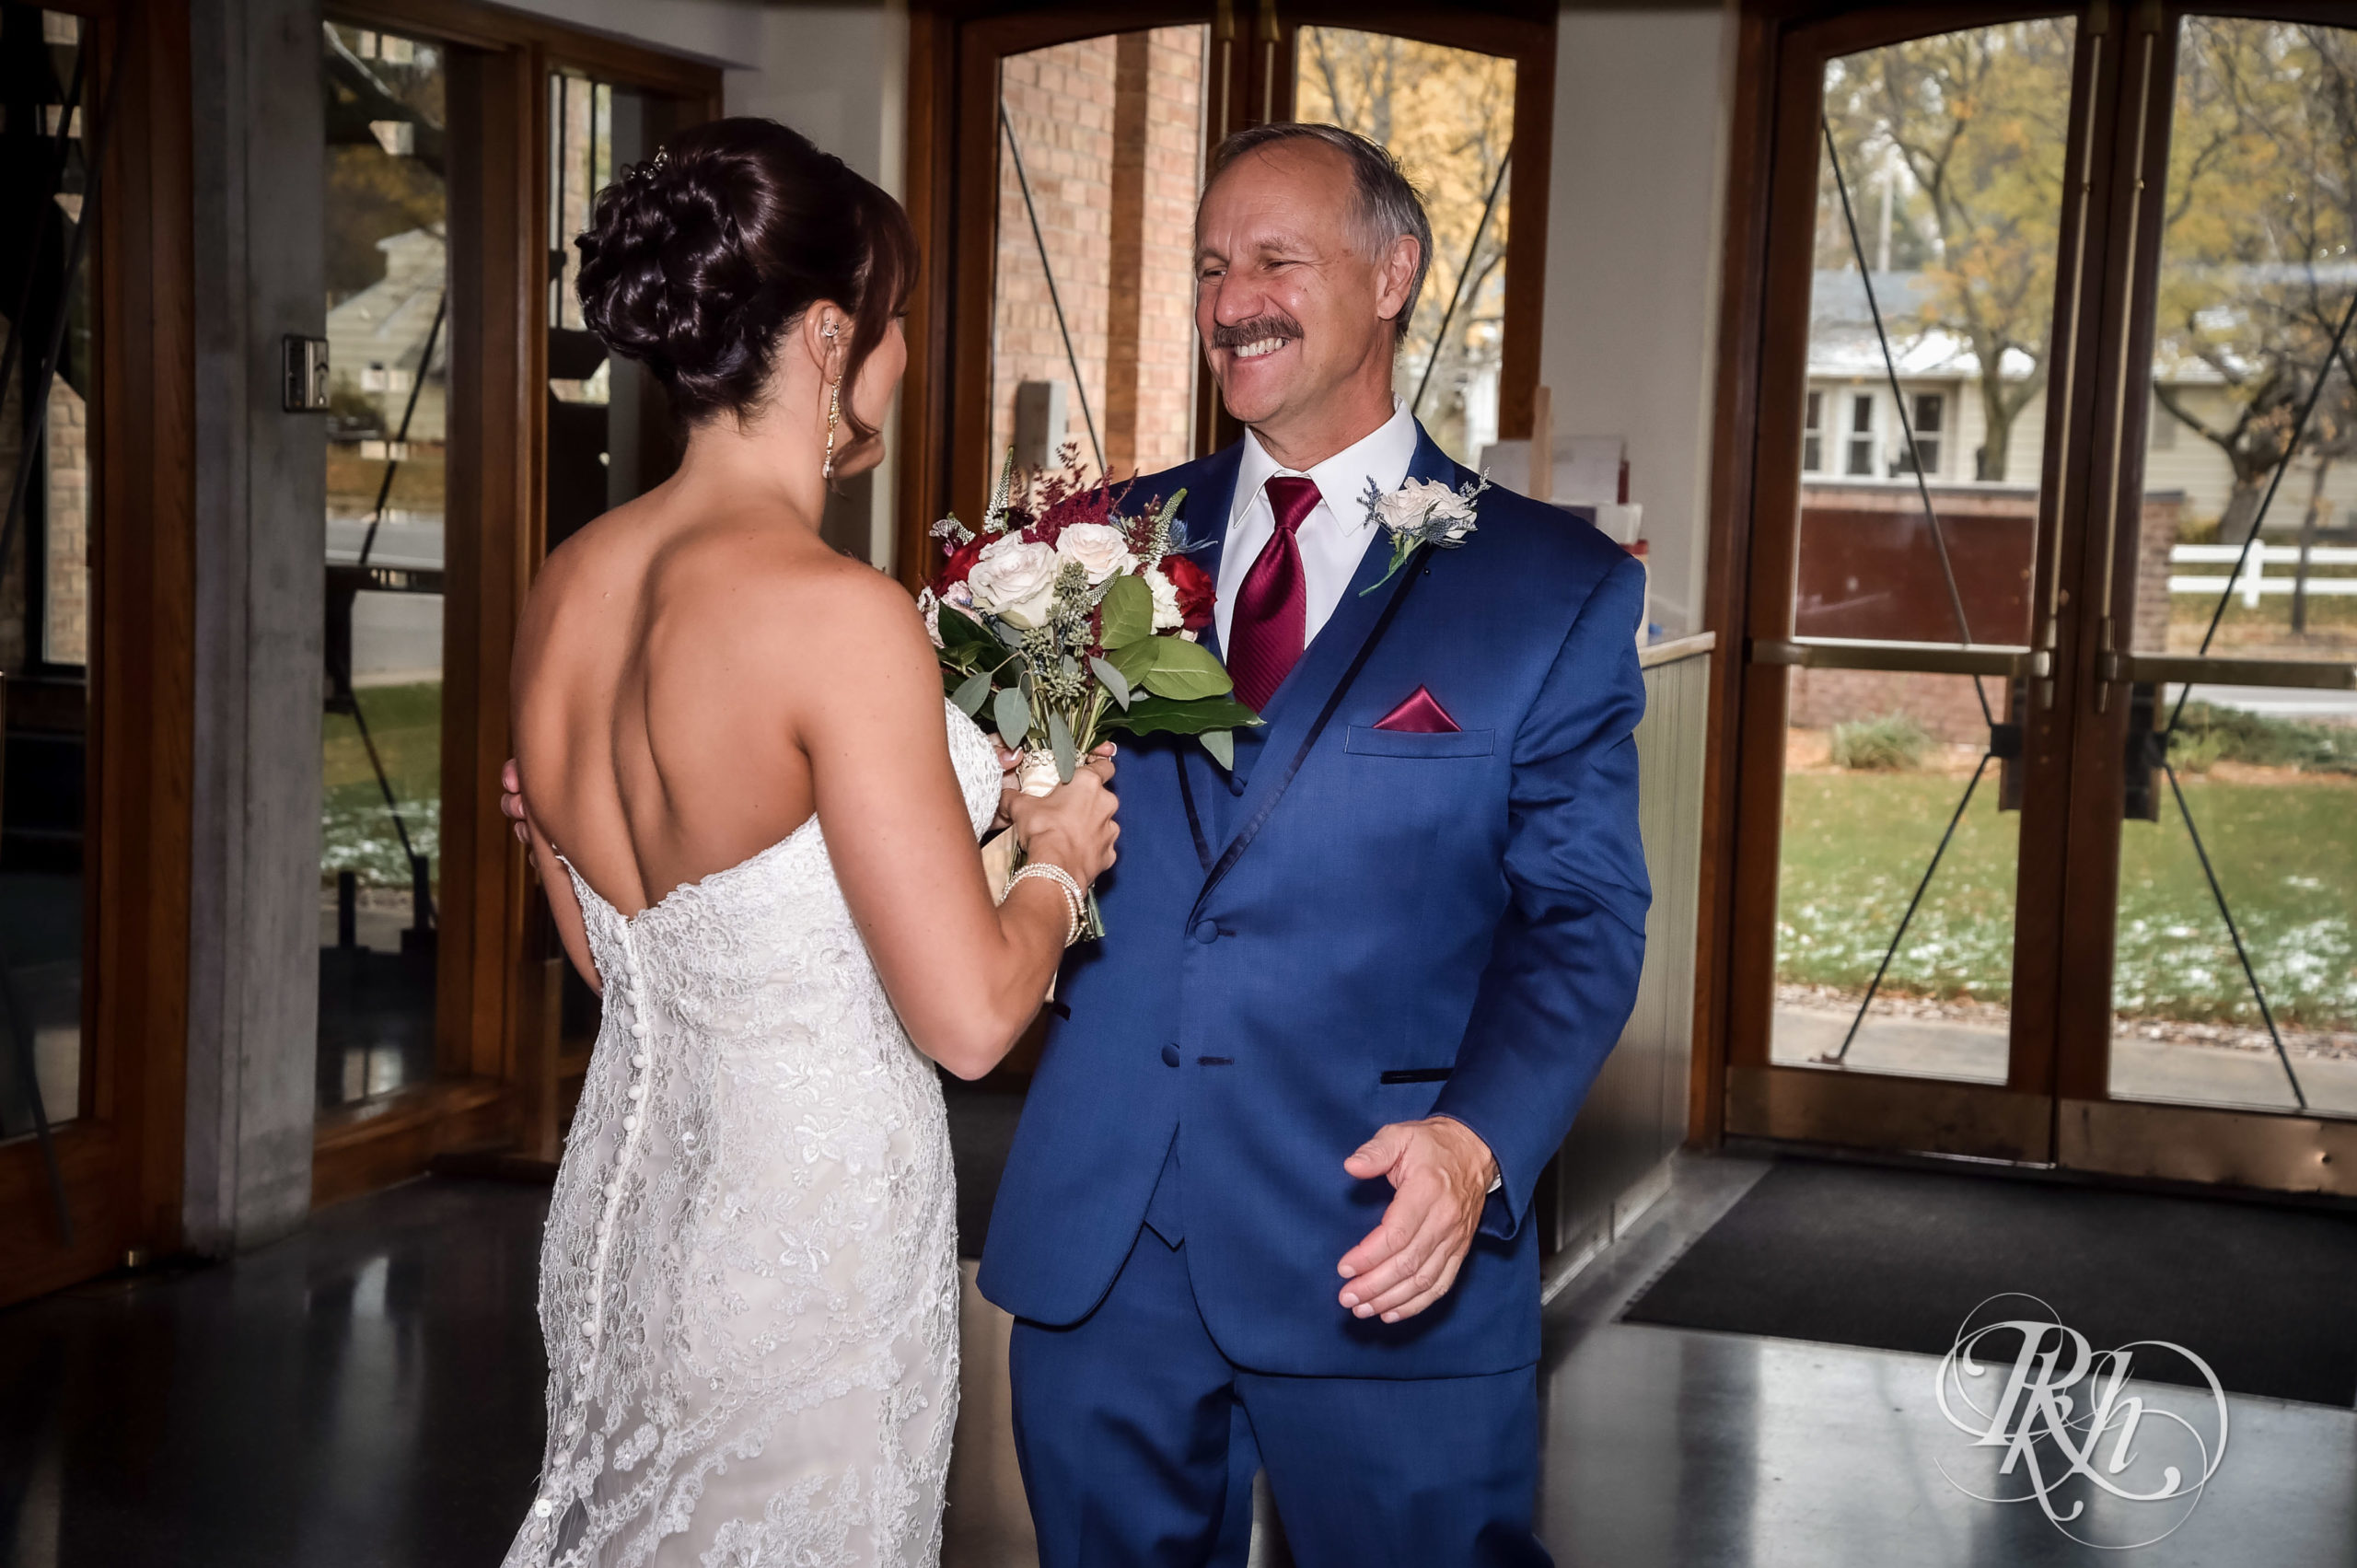 Bride laughing with dad at church before wedding ceremony in Minneapolis, Minnesota.